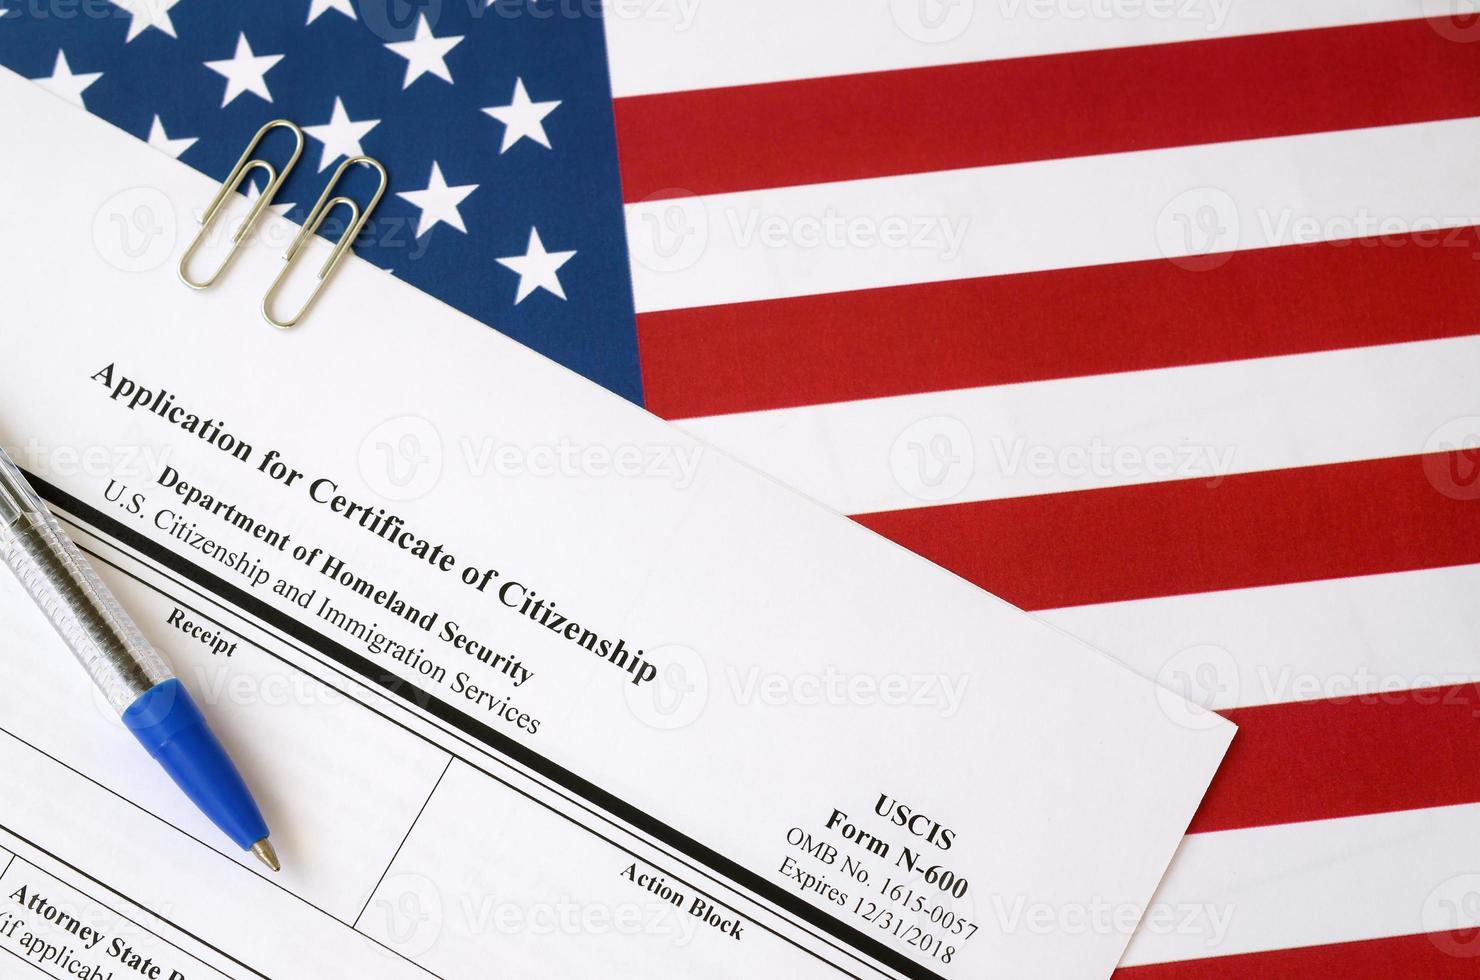 N-600 Application for Certificate of Citizenship blank form lies on United States flag with blue pen from Department of Homeland Security photo